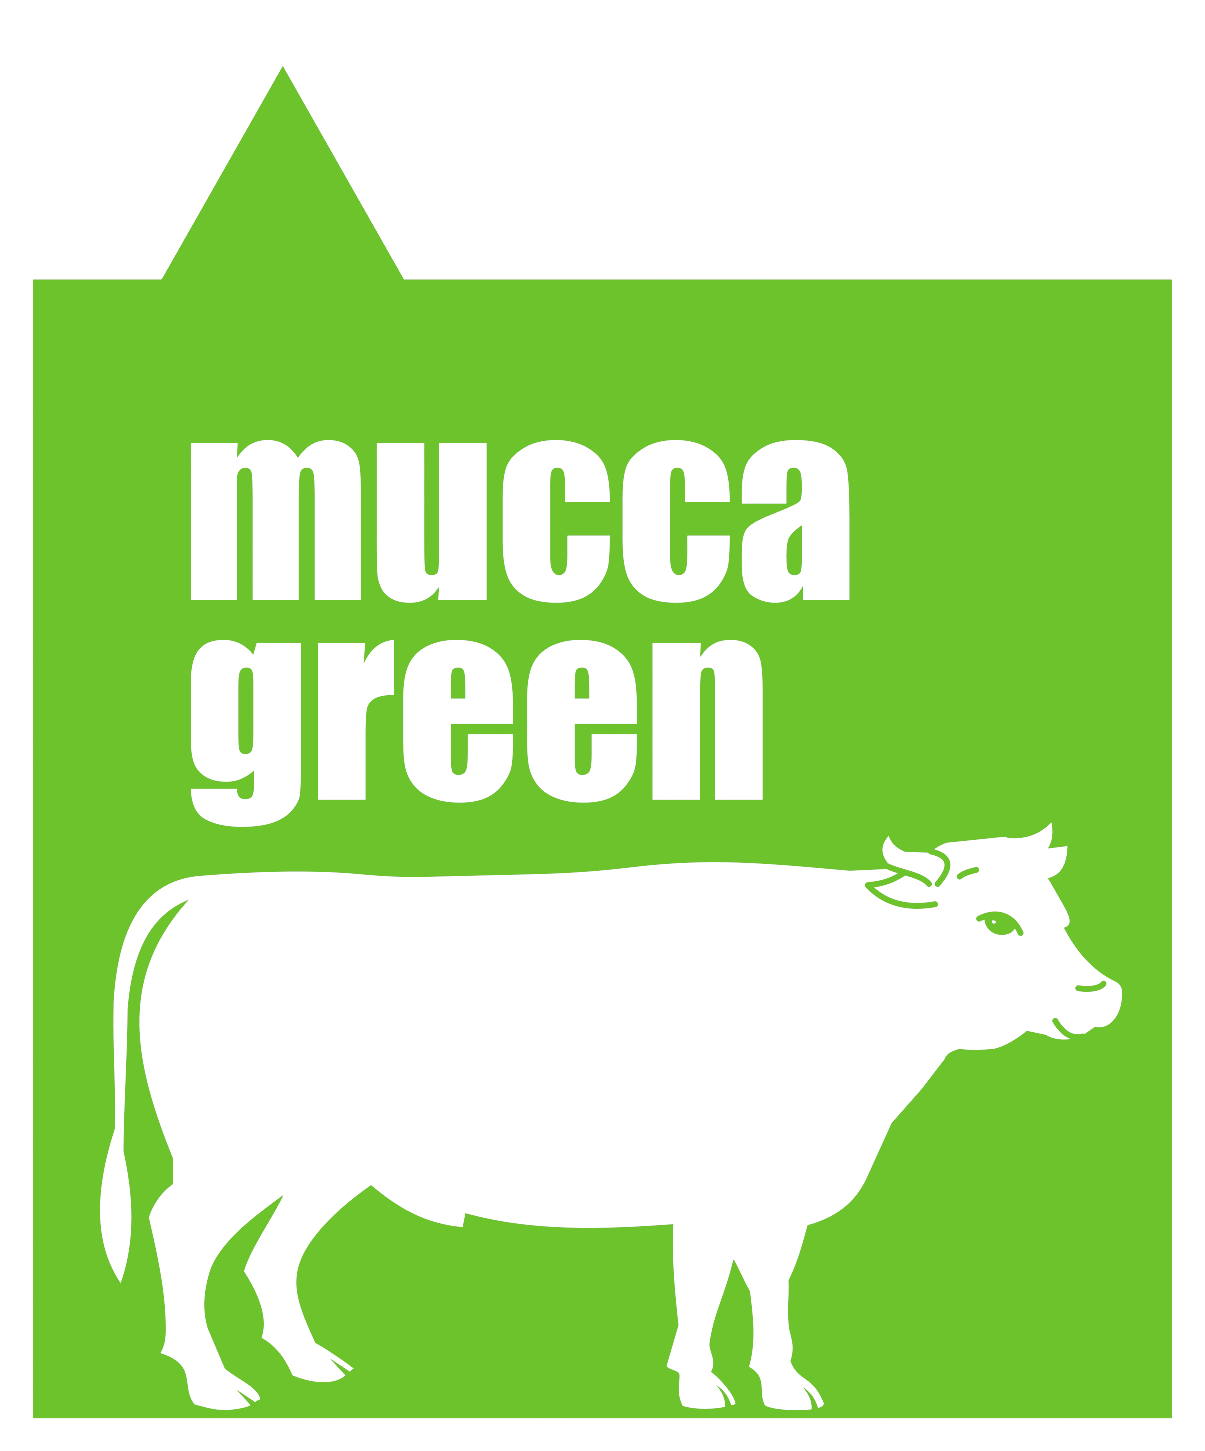 muccagreen